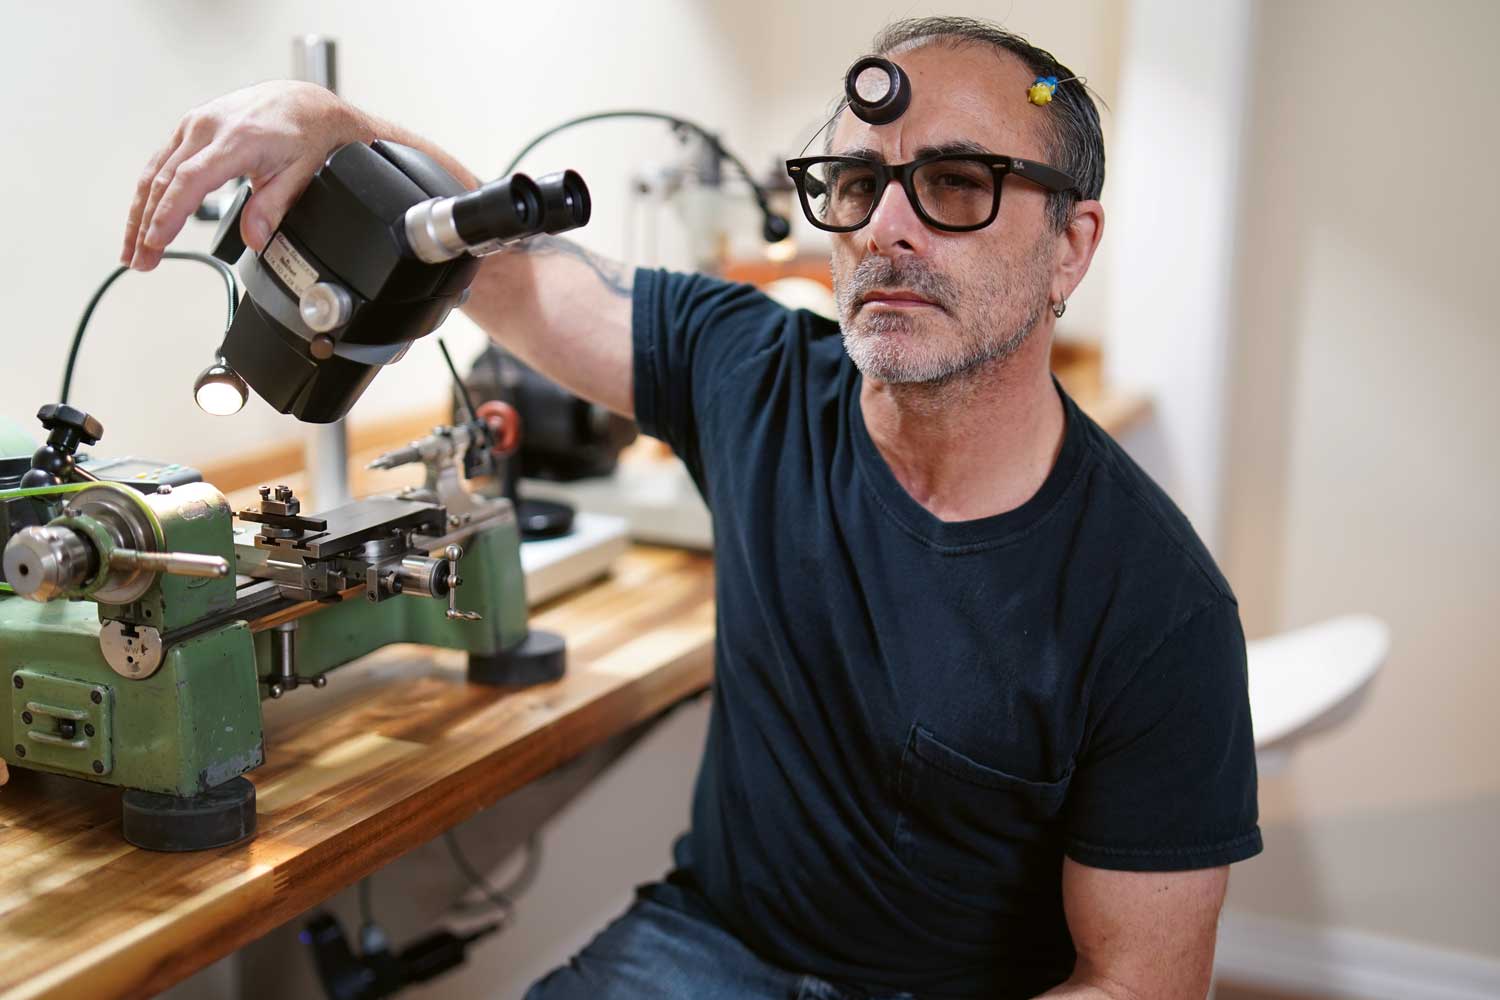 Dan Spitz works alone on restored machines constructing everything himself, including his own ergonomic watchmaker’s bench (Images: Lynnette Brink)